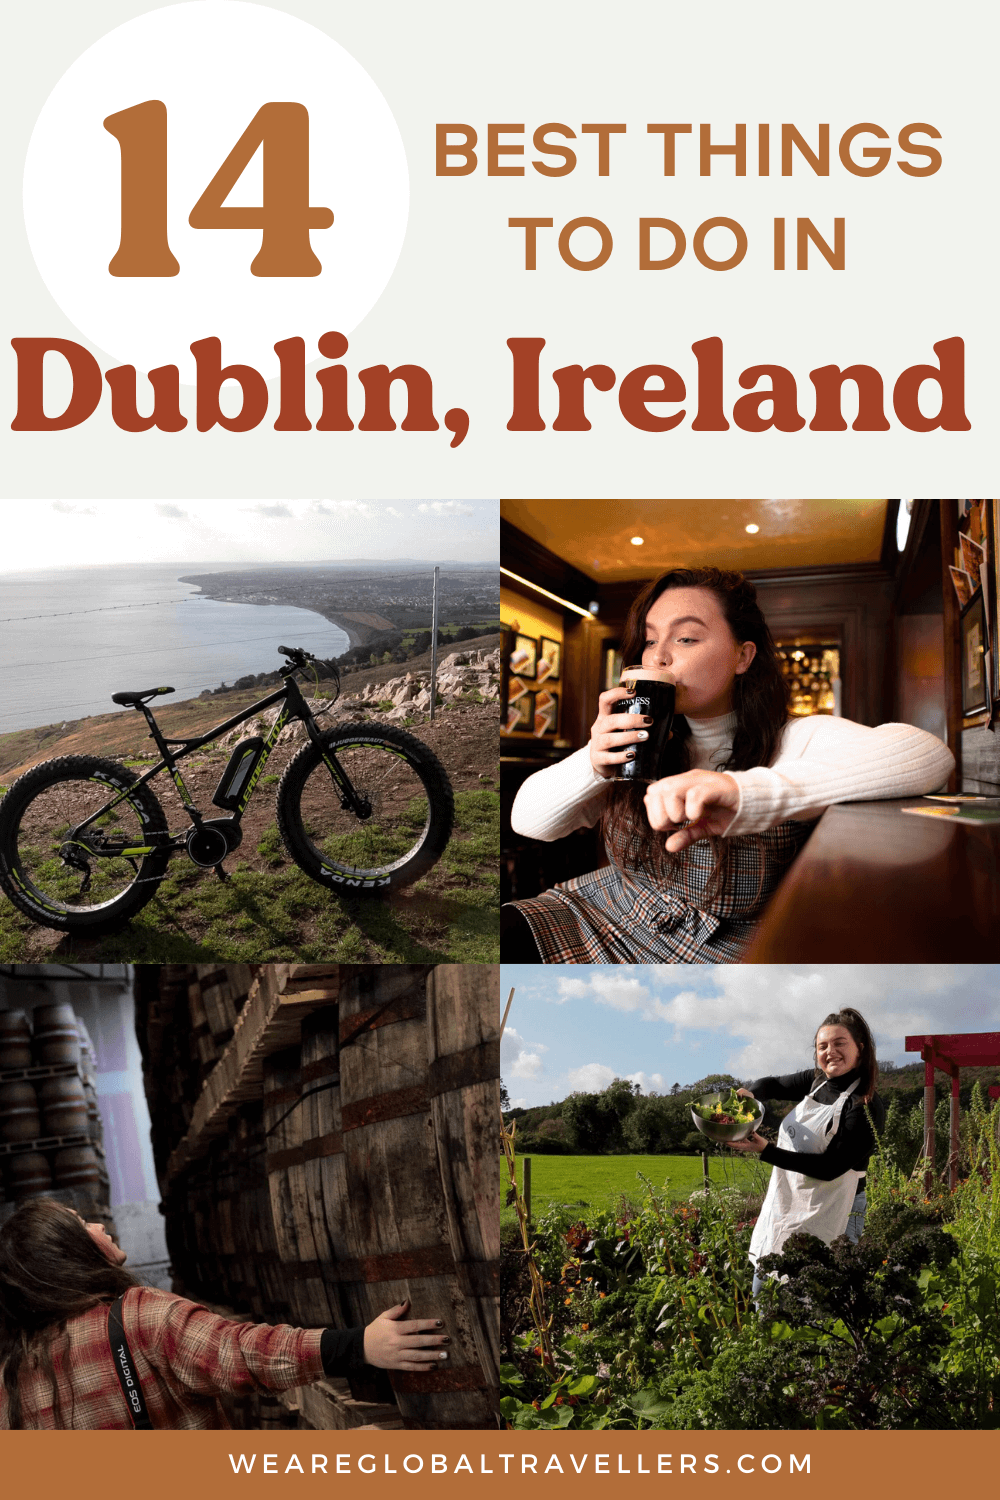 15 of the best things to do in Dublin, Ireland